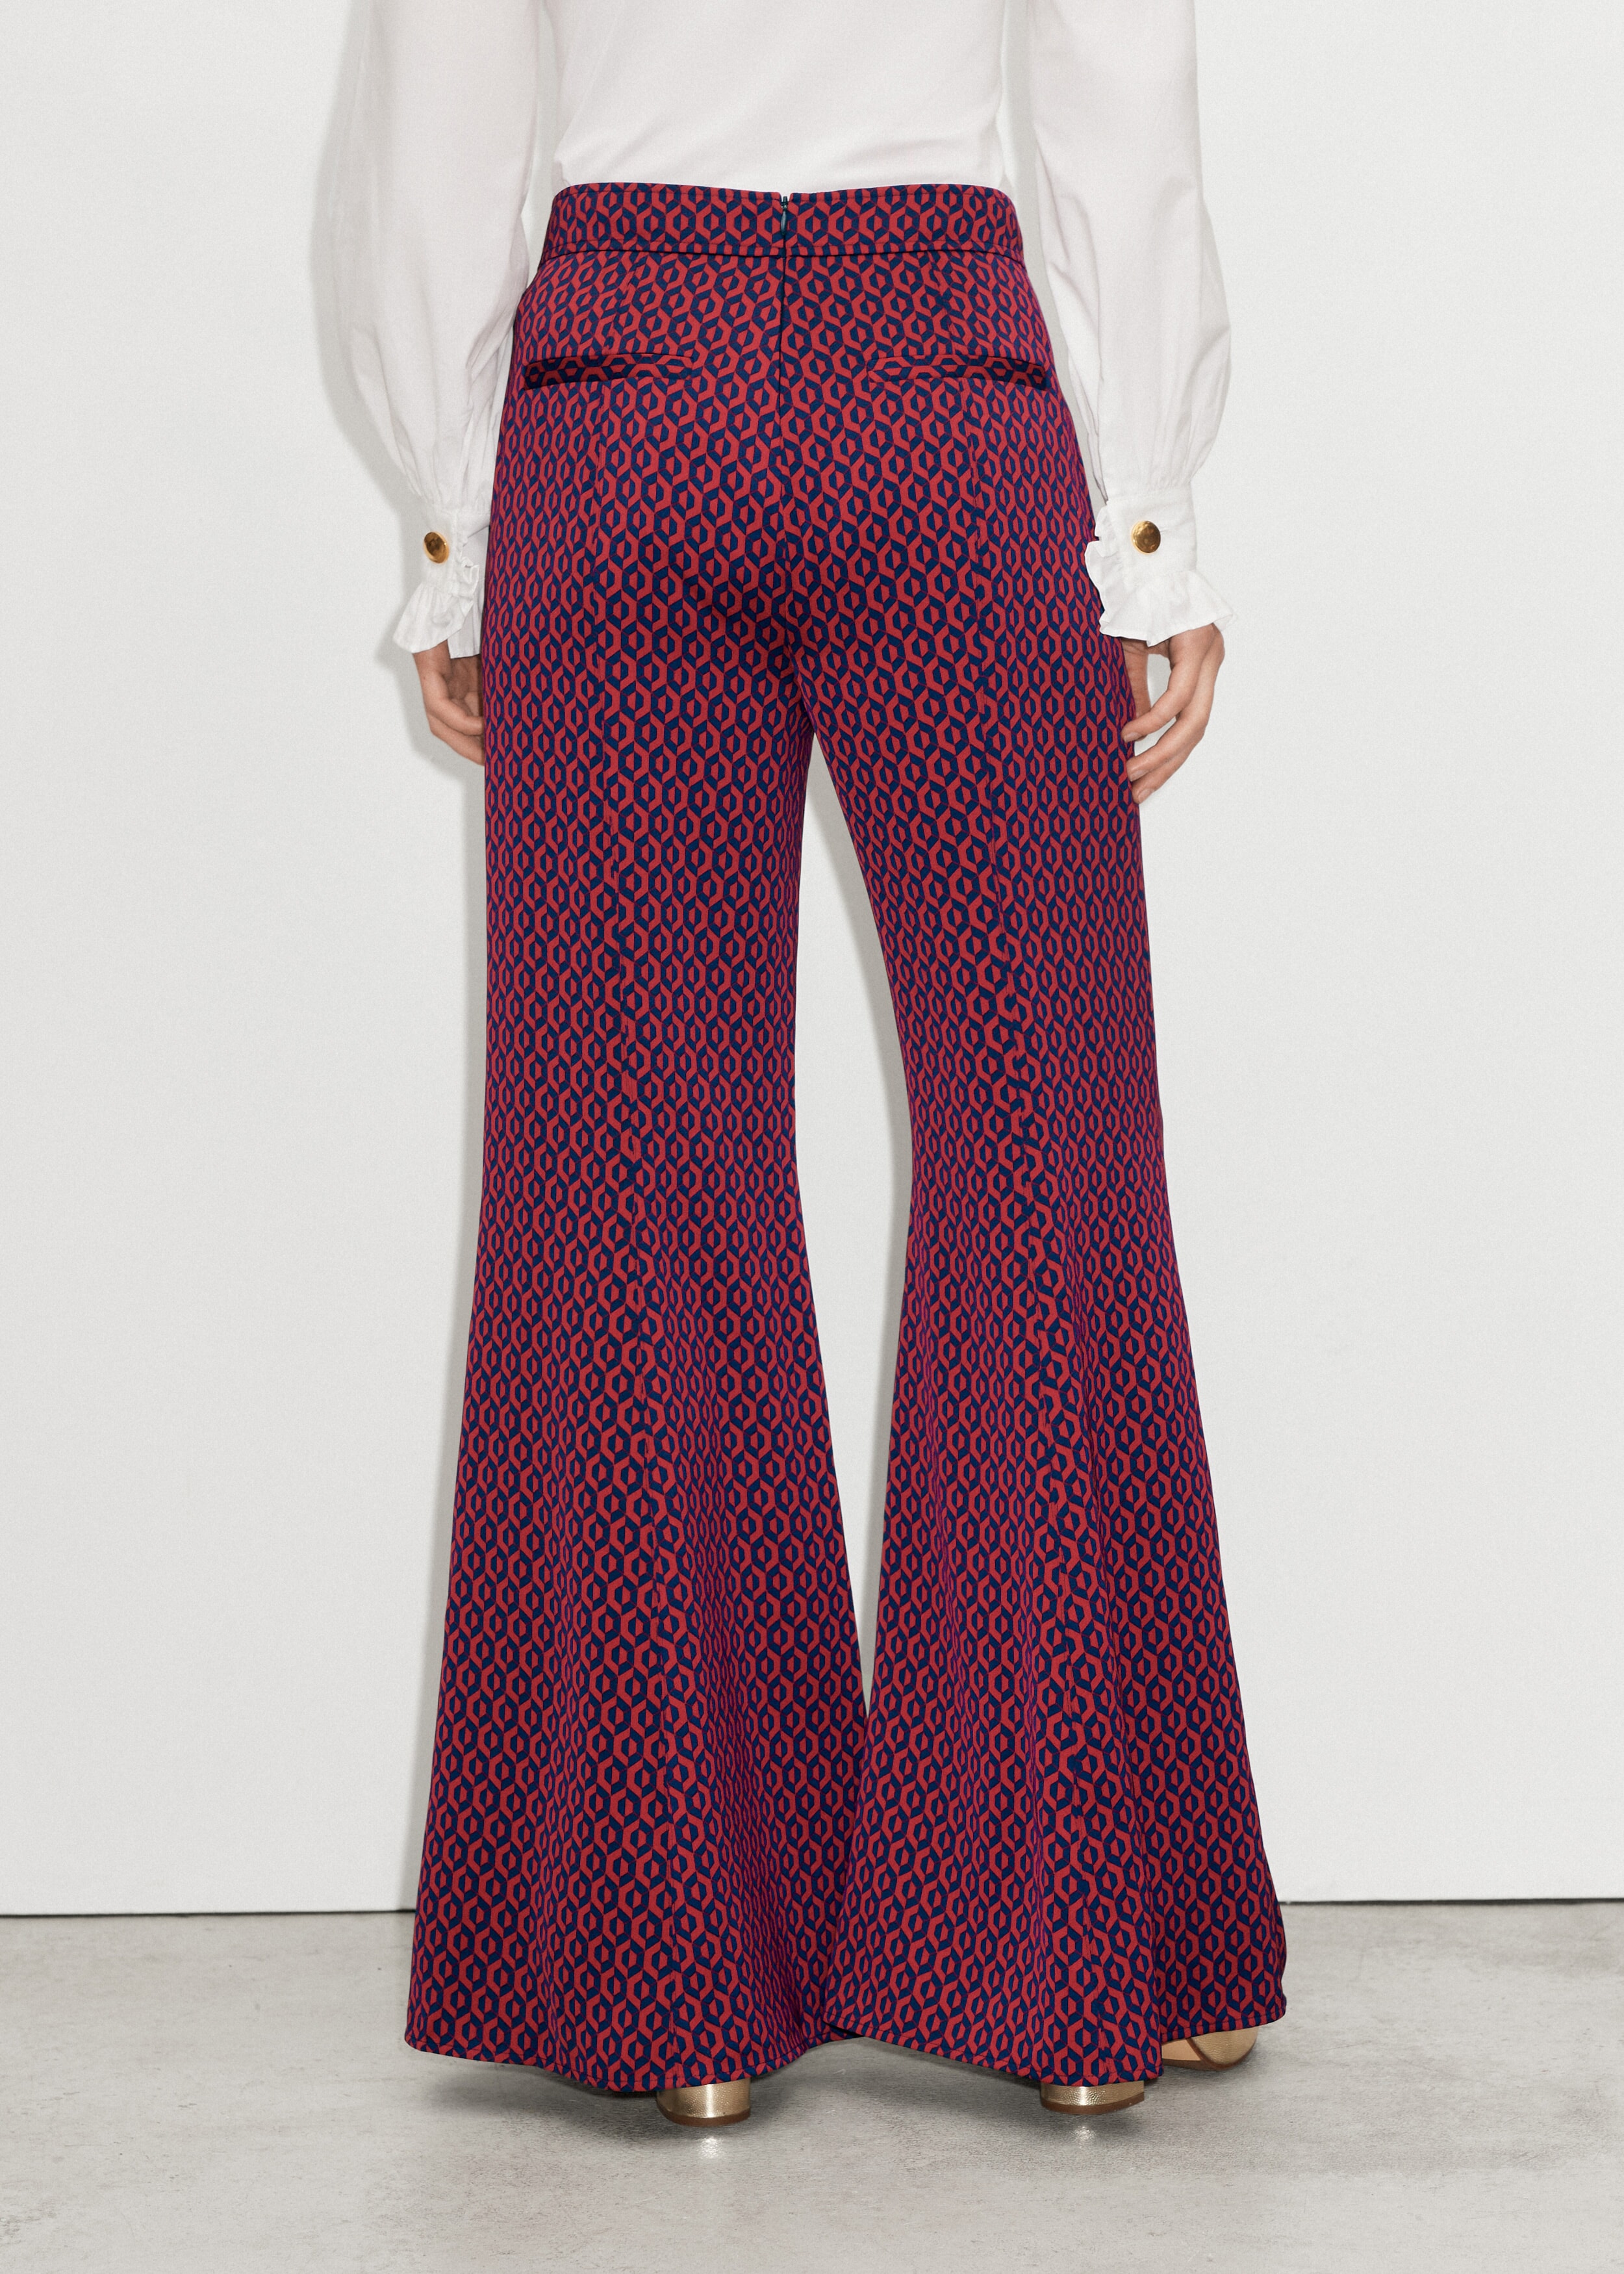 Geo Hex Print Exaggerated Flare Pant Purple/Midnight Navy